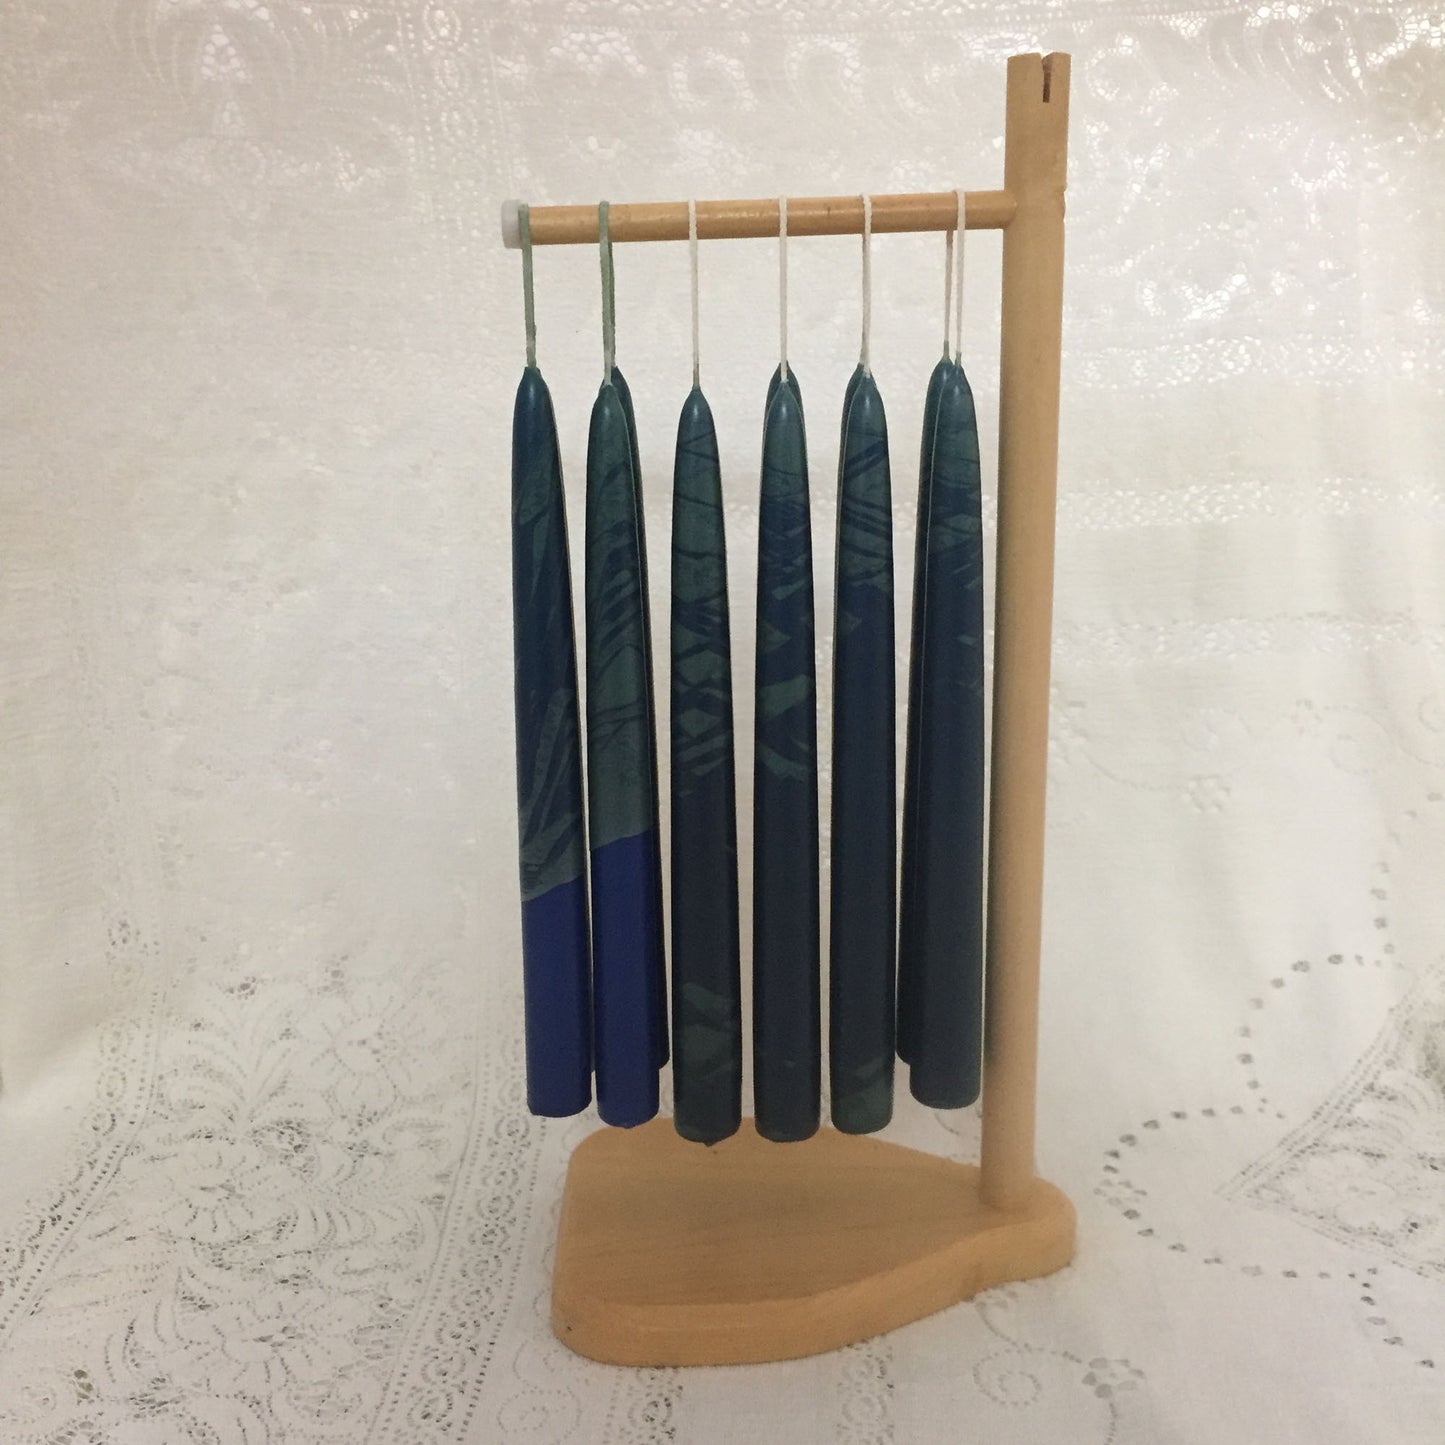 Artisan Multi-Coloured taper candles